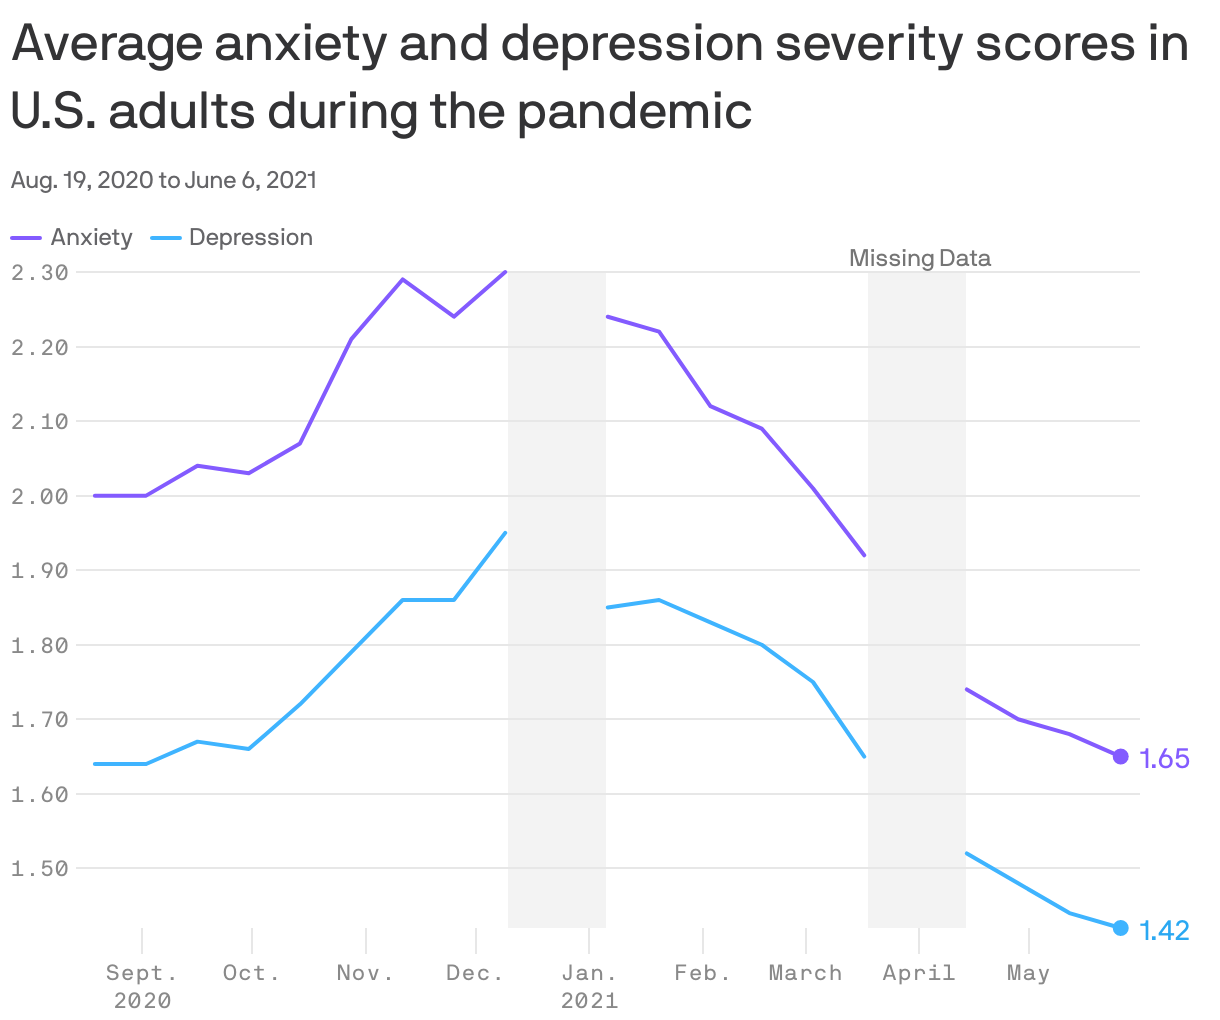 Average anxiety and depression severity scores in U.S. adults during the pandemic